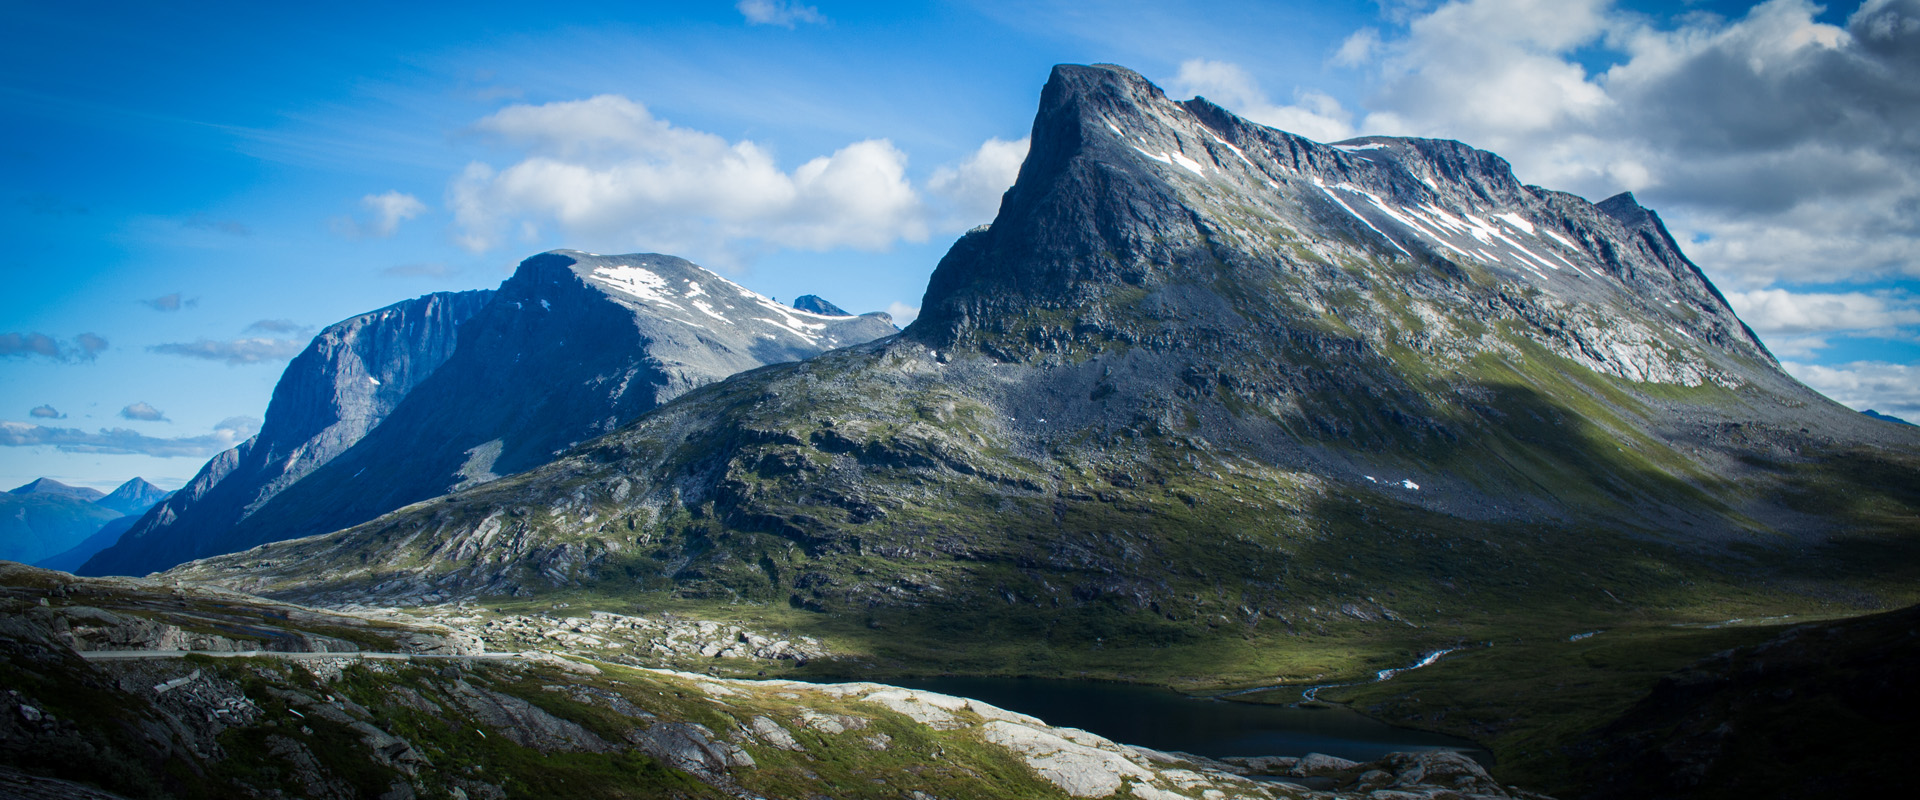 A Norway Road Trip in Pictures